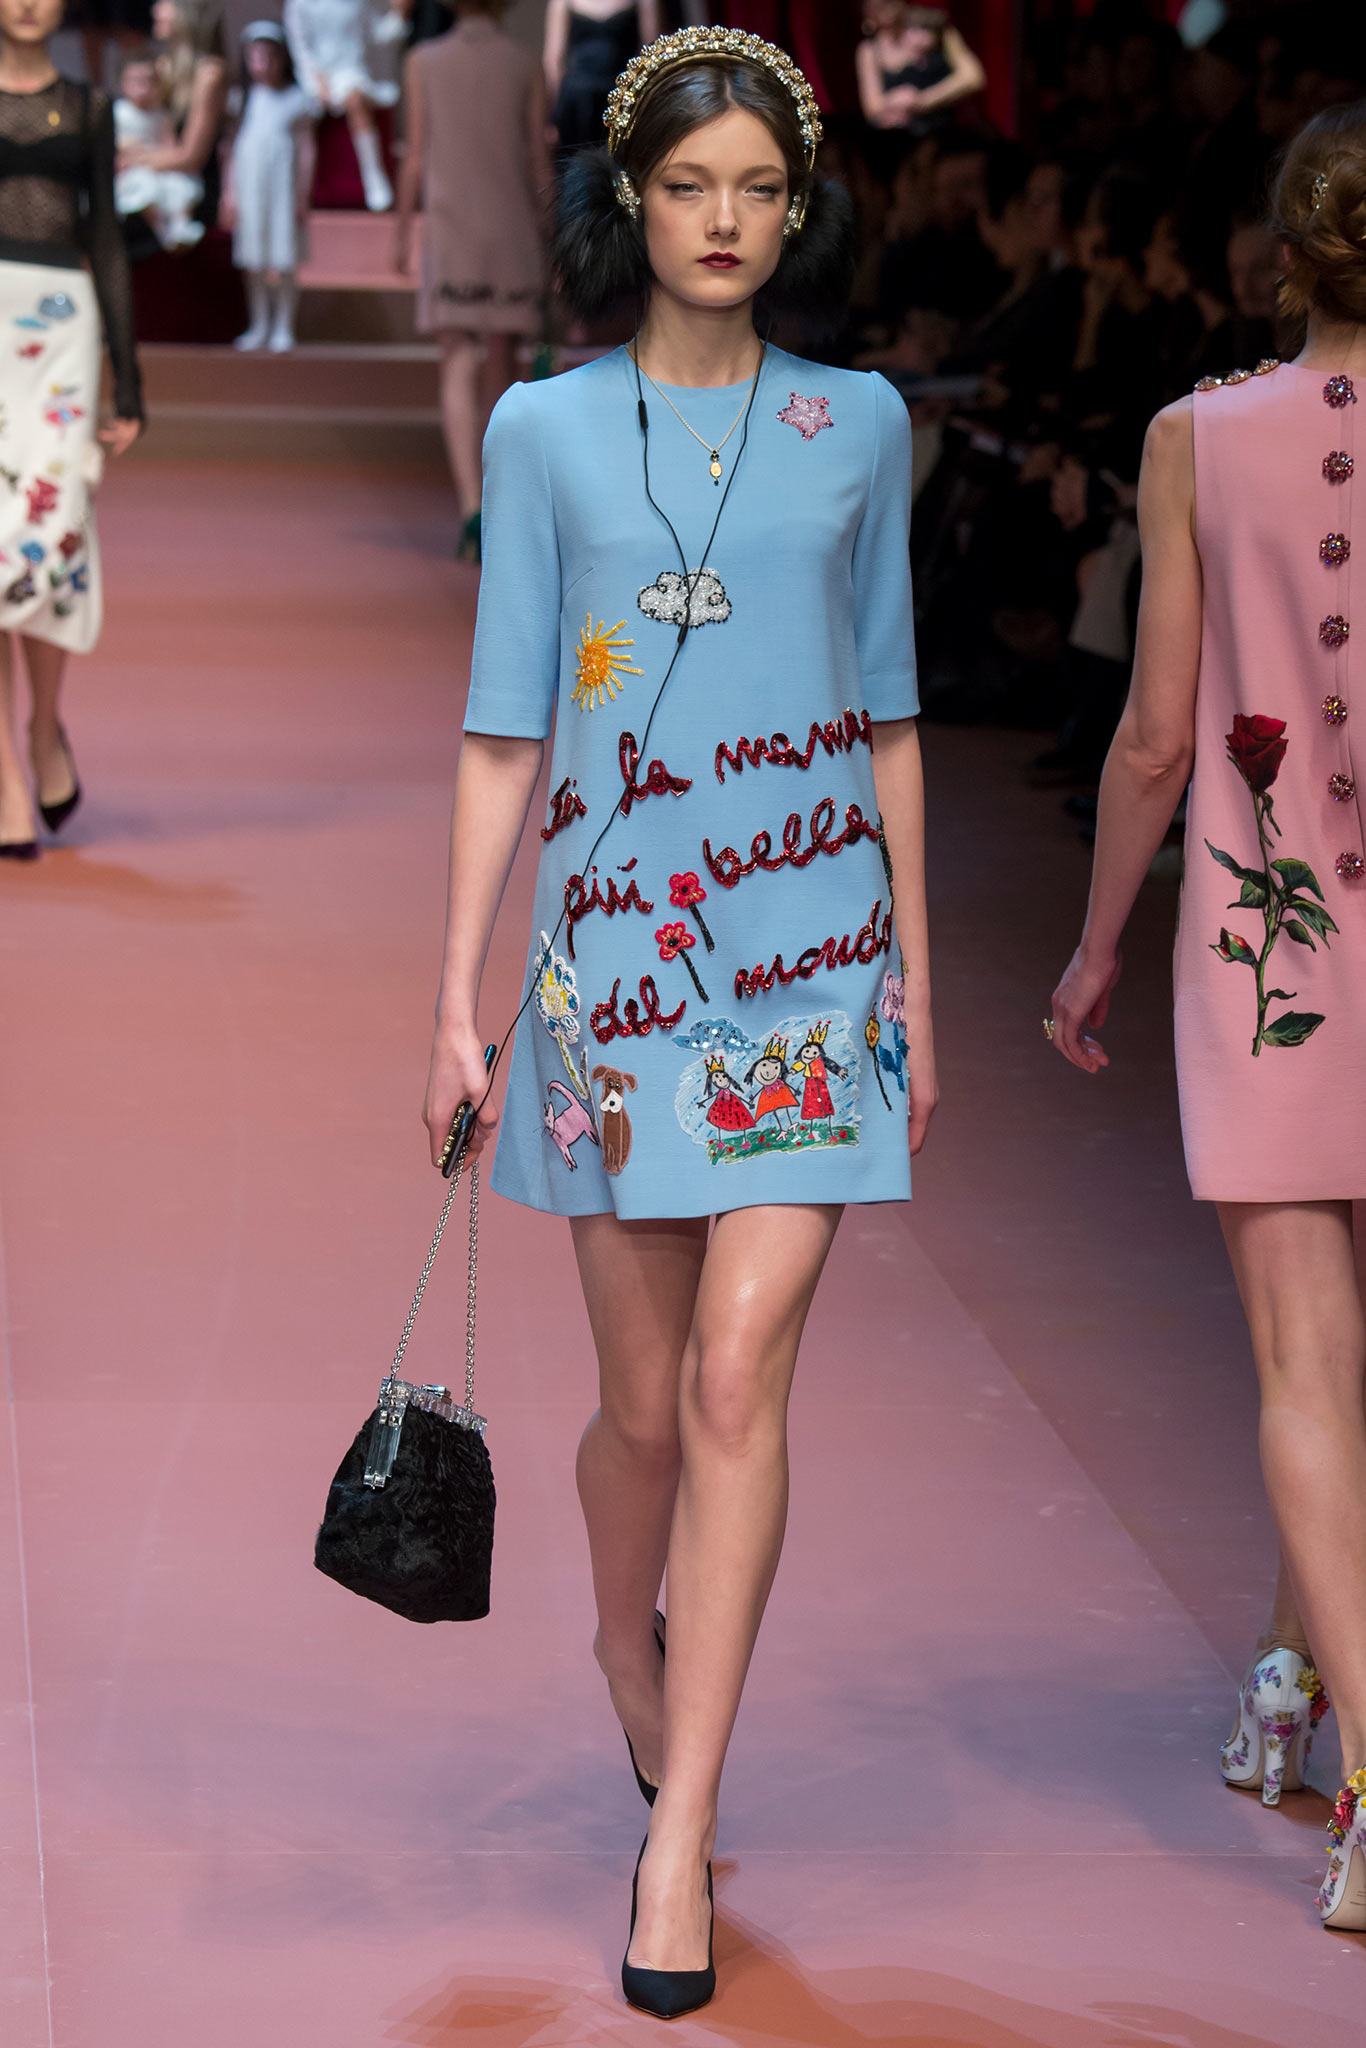 dolce and gabbana 2015 fall collection